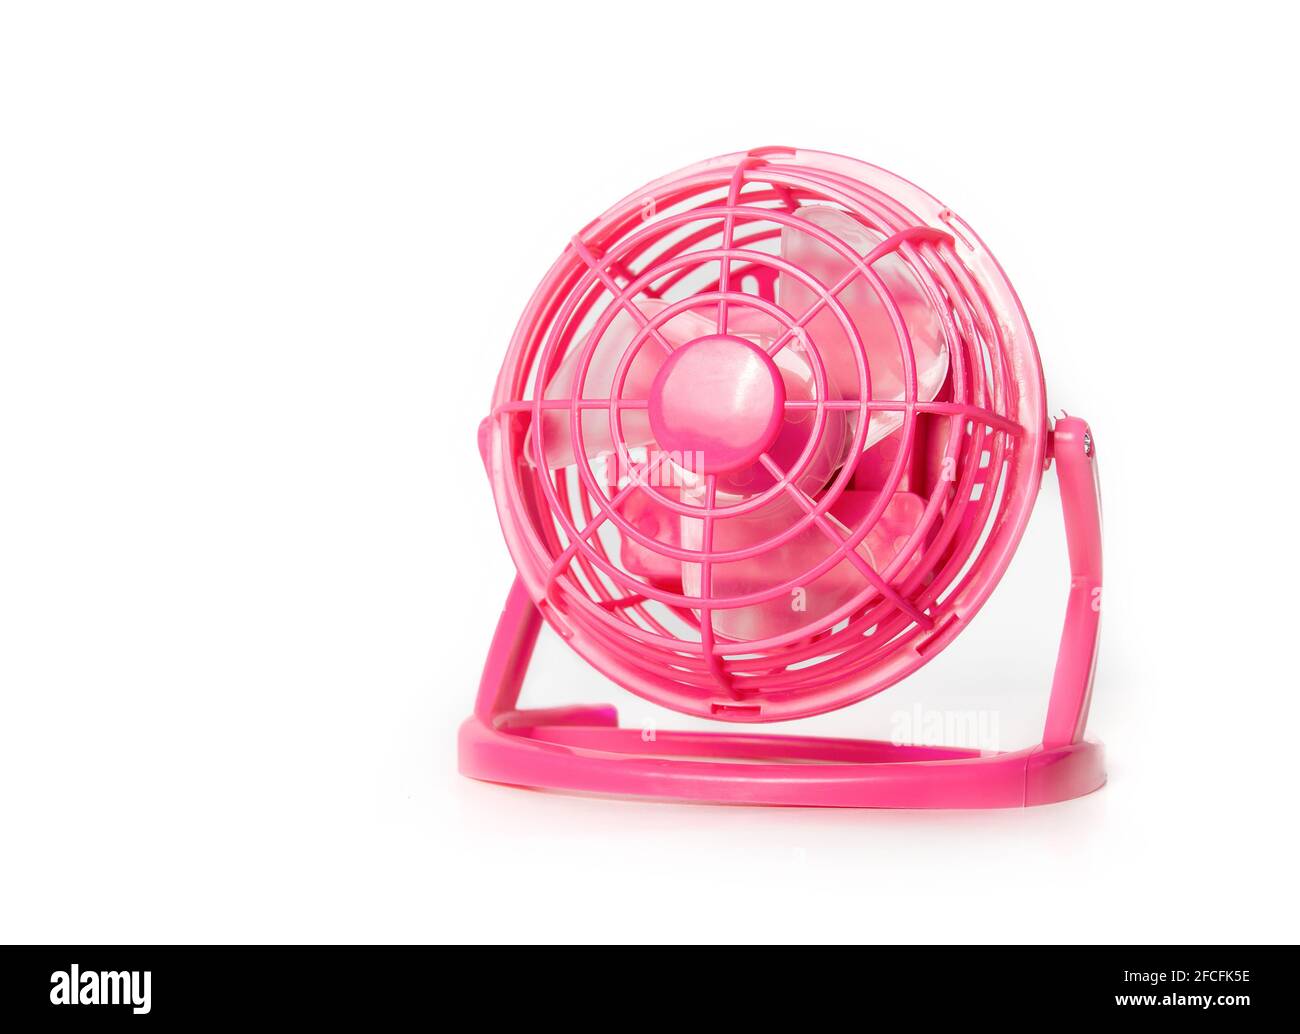 Mini fan. Portable battery operated hot pink small table ventilator to cool  down and circulate air during hot summer days. Use at the office, car trip  Stock Photo - Alamy